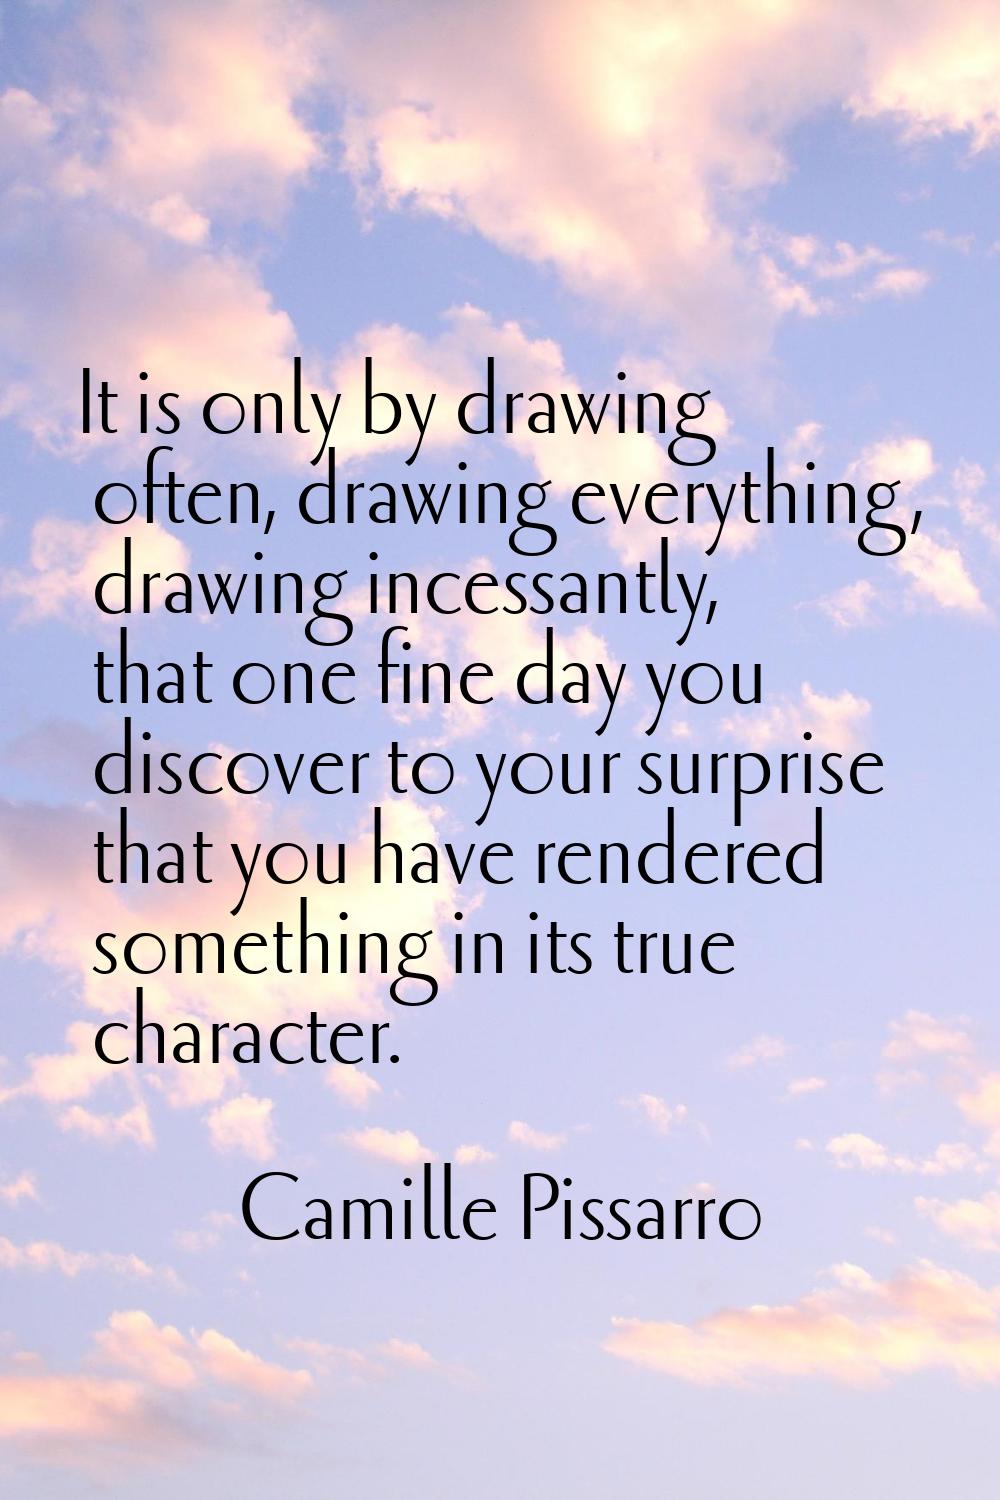 It is only by drawing often, drawing everything, drawing incessantly, that one fine day you discove